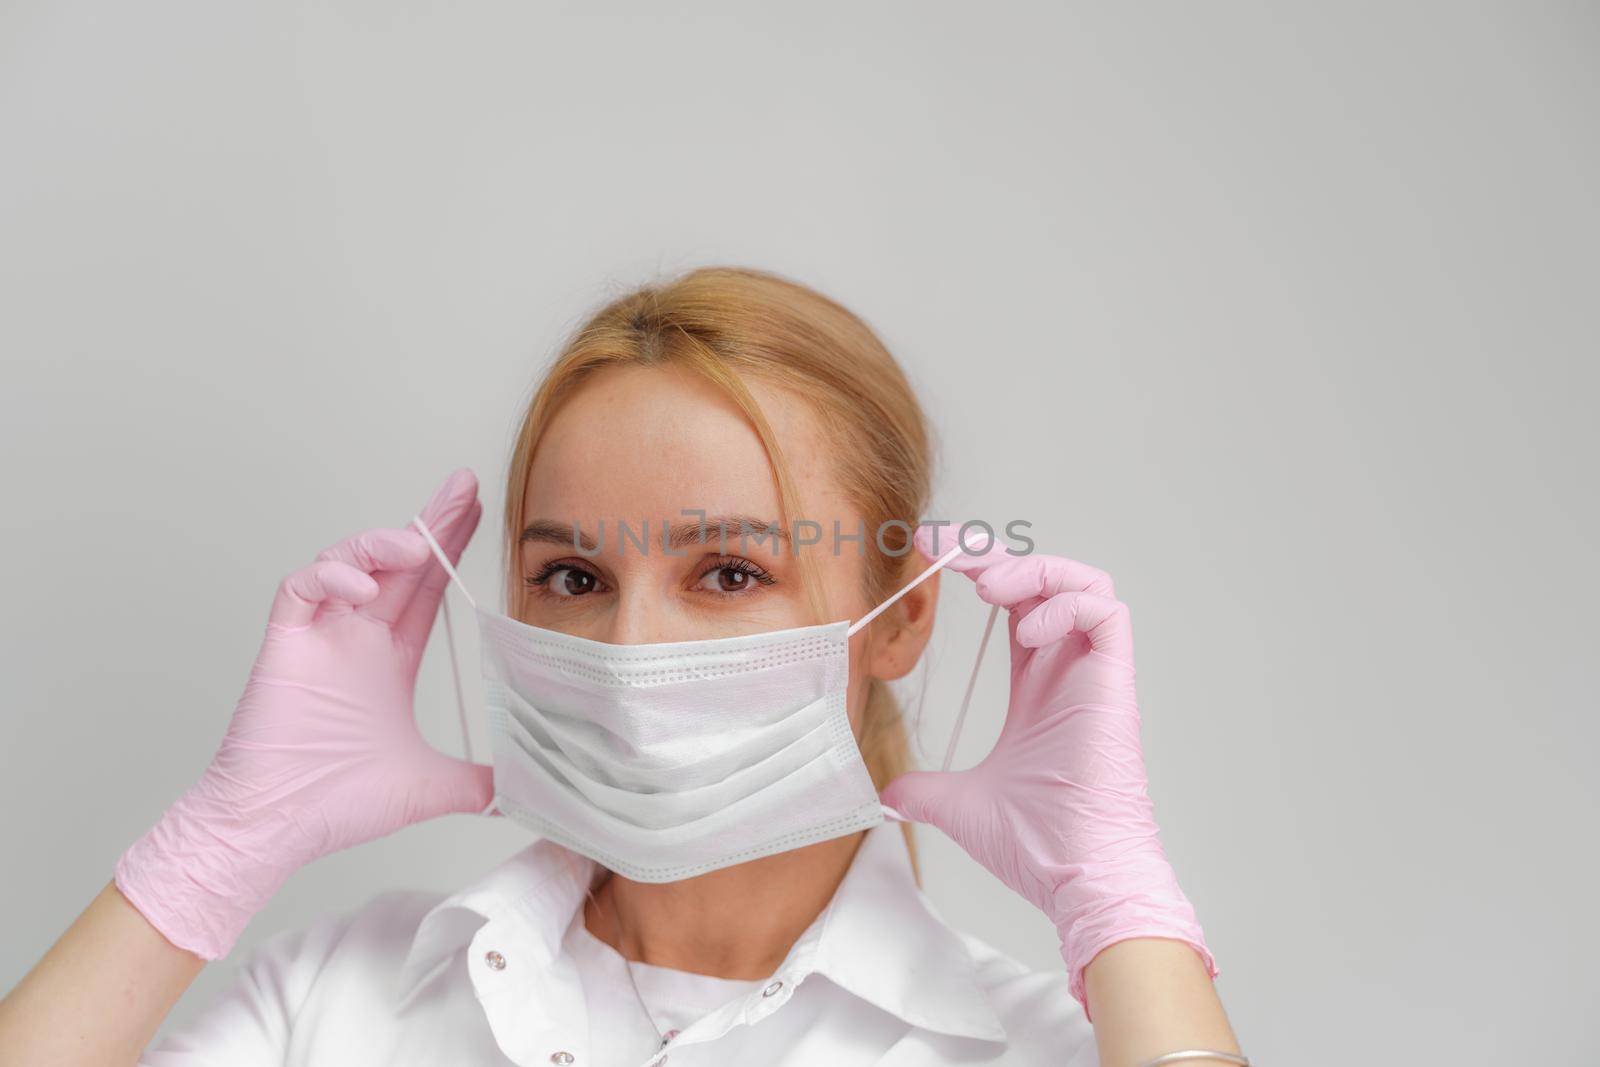 The doctor puts on a mask. Close-up portrait of medical staff. A woman in a protective mask .Isolated on a white background. Healthcare, cosmetology and medical concept.